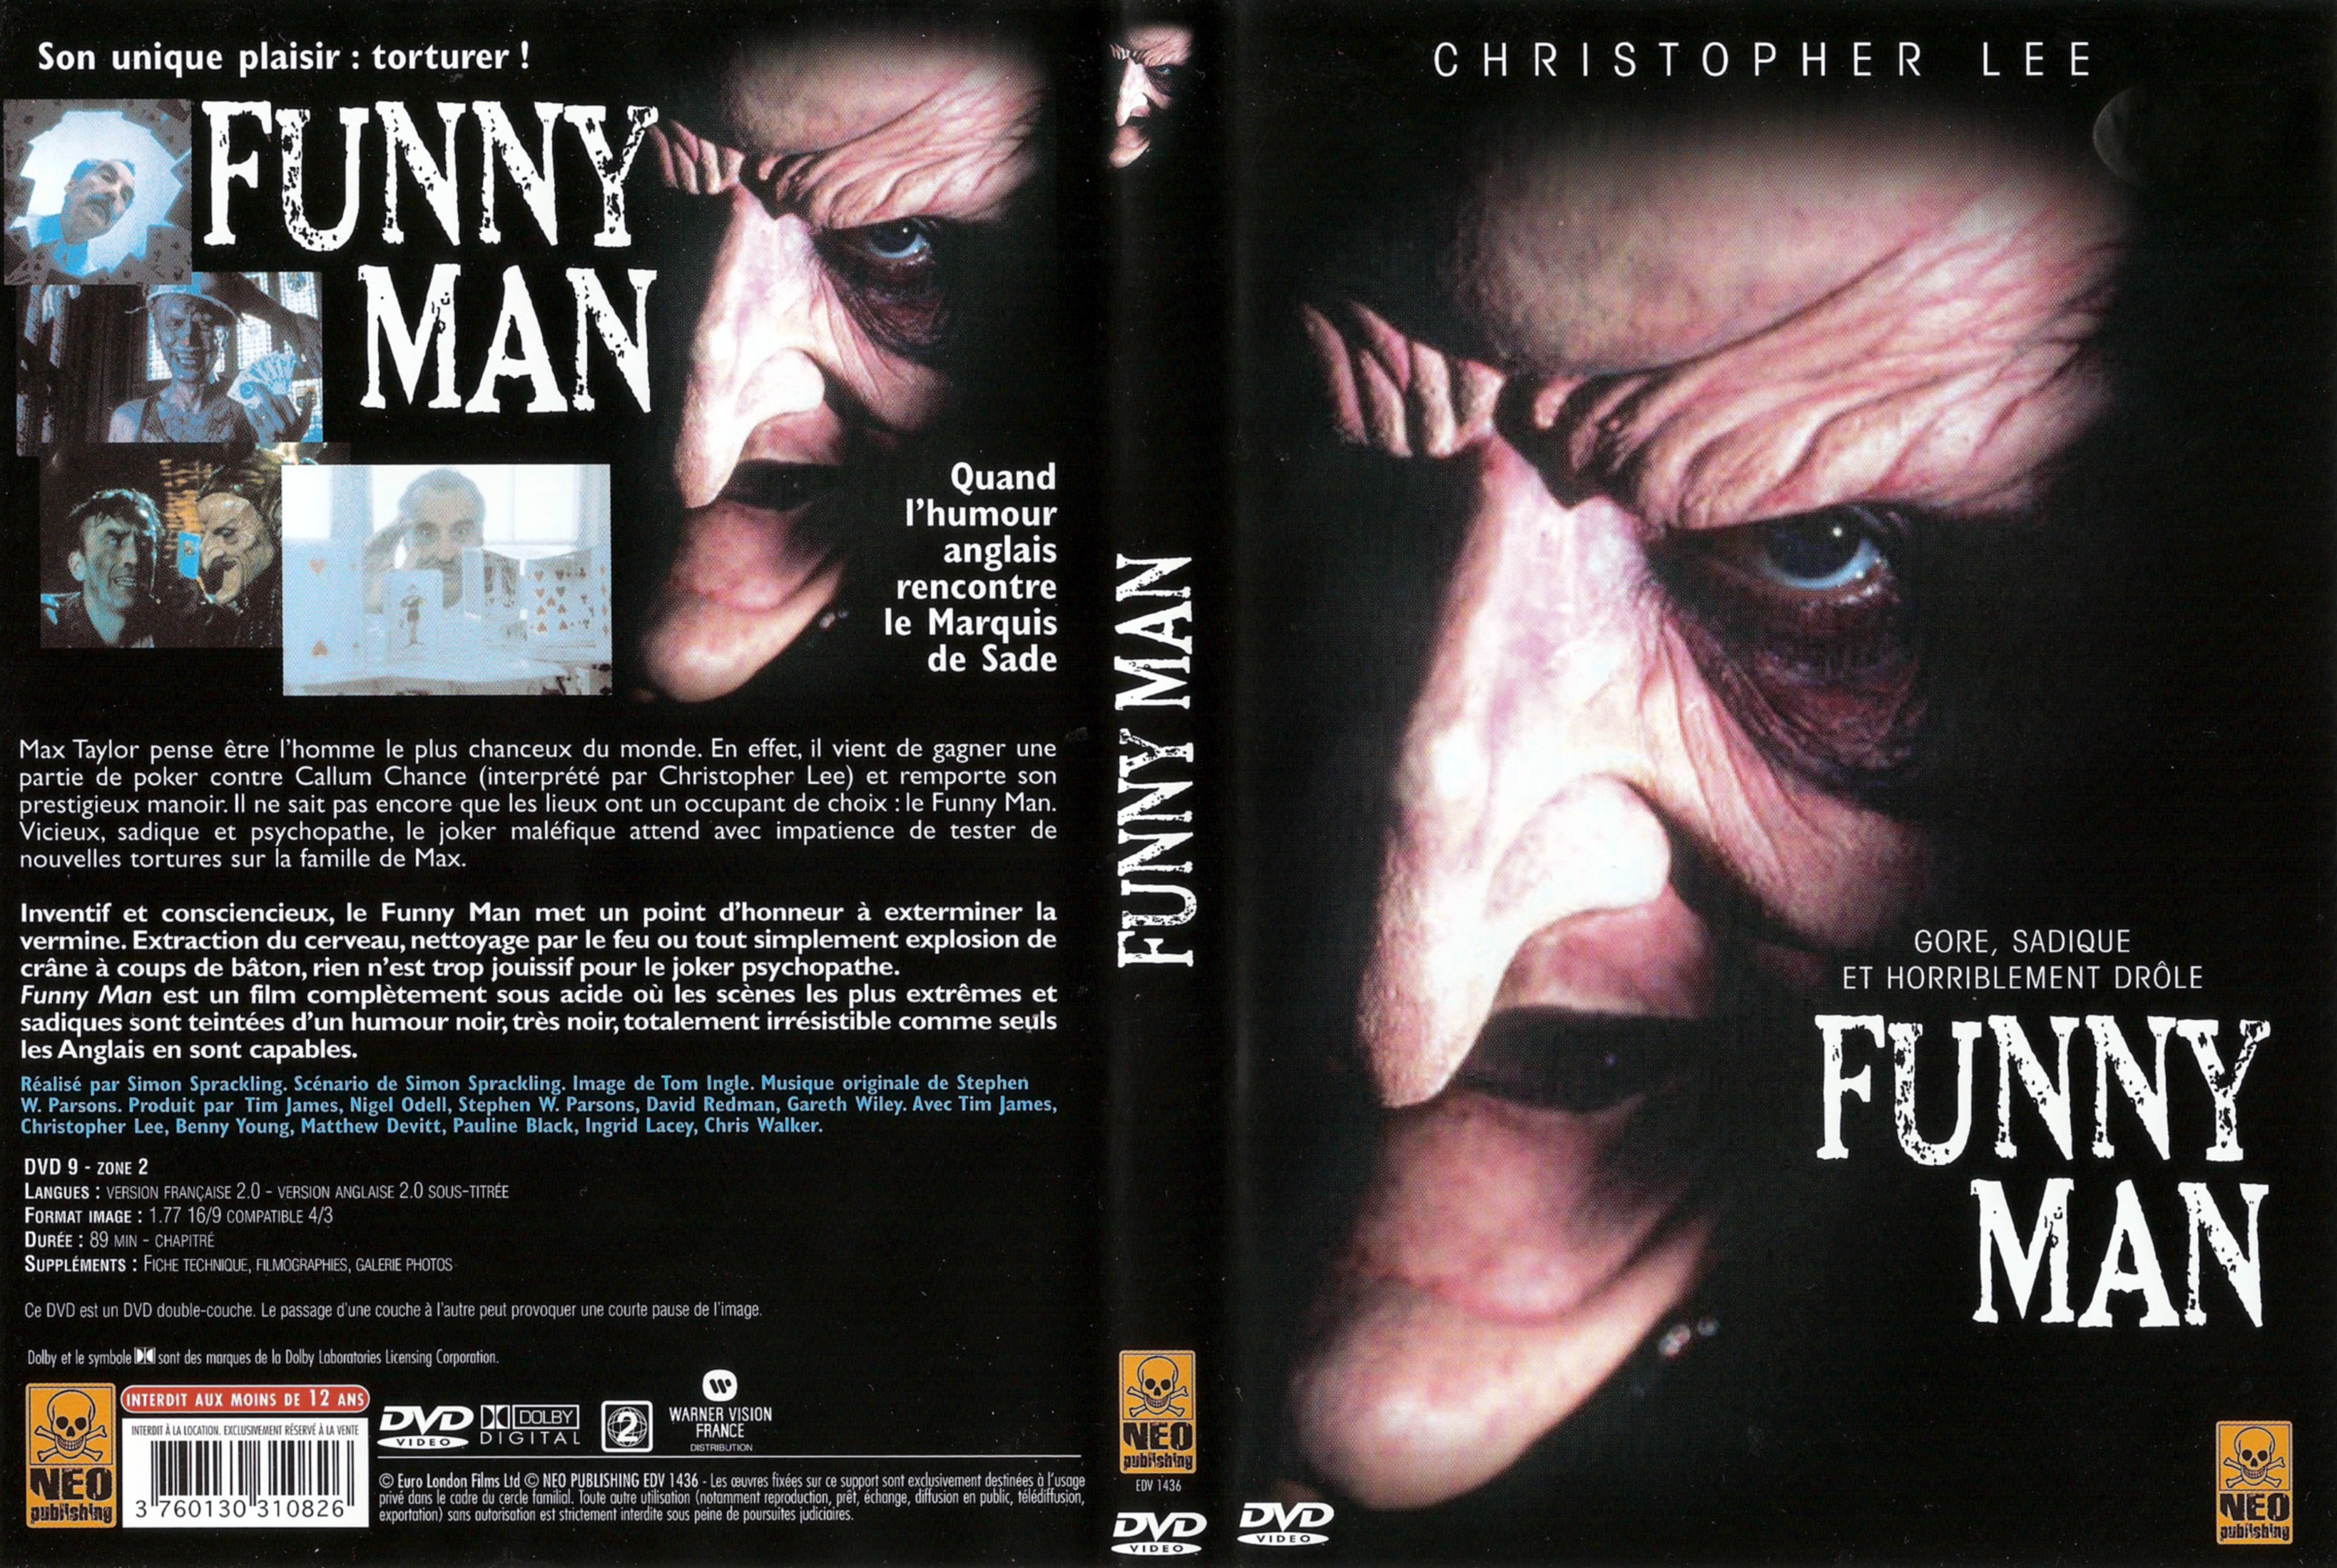 Jaquette DVD Funny Man